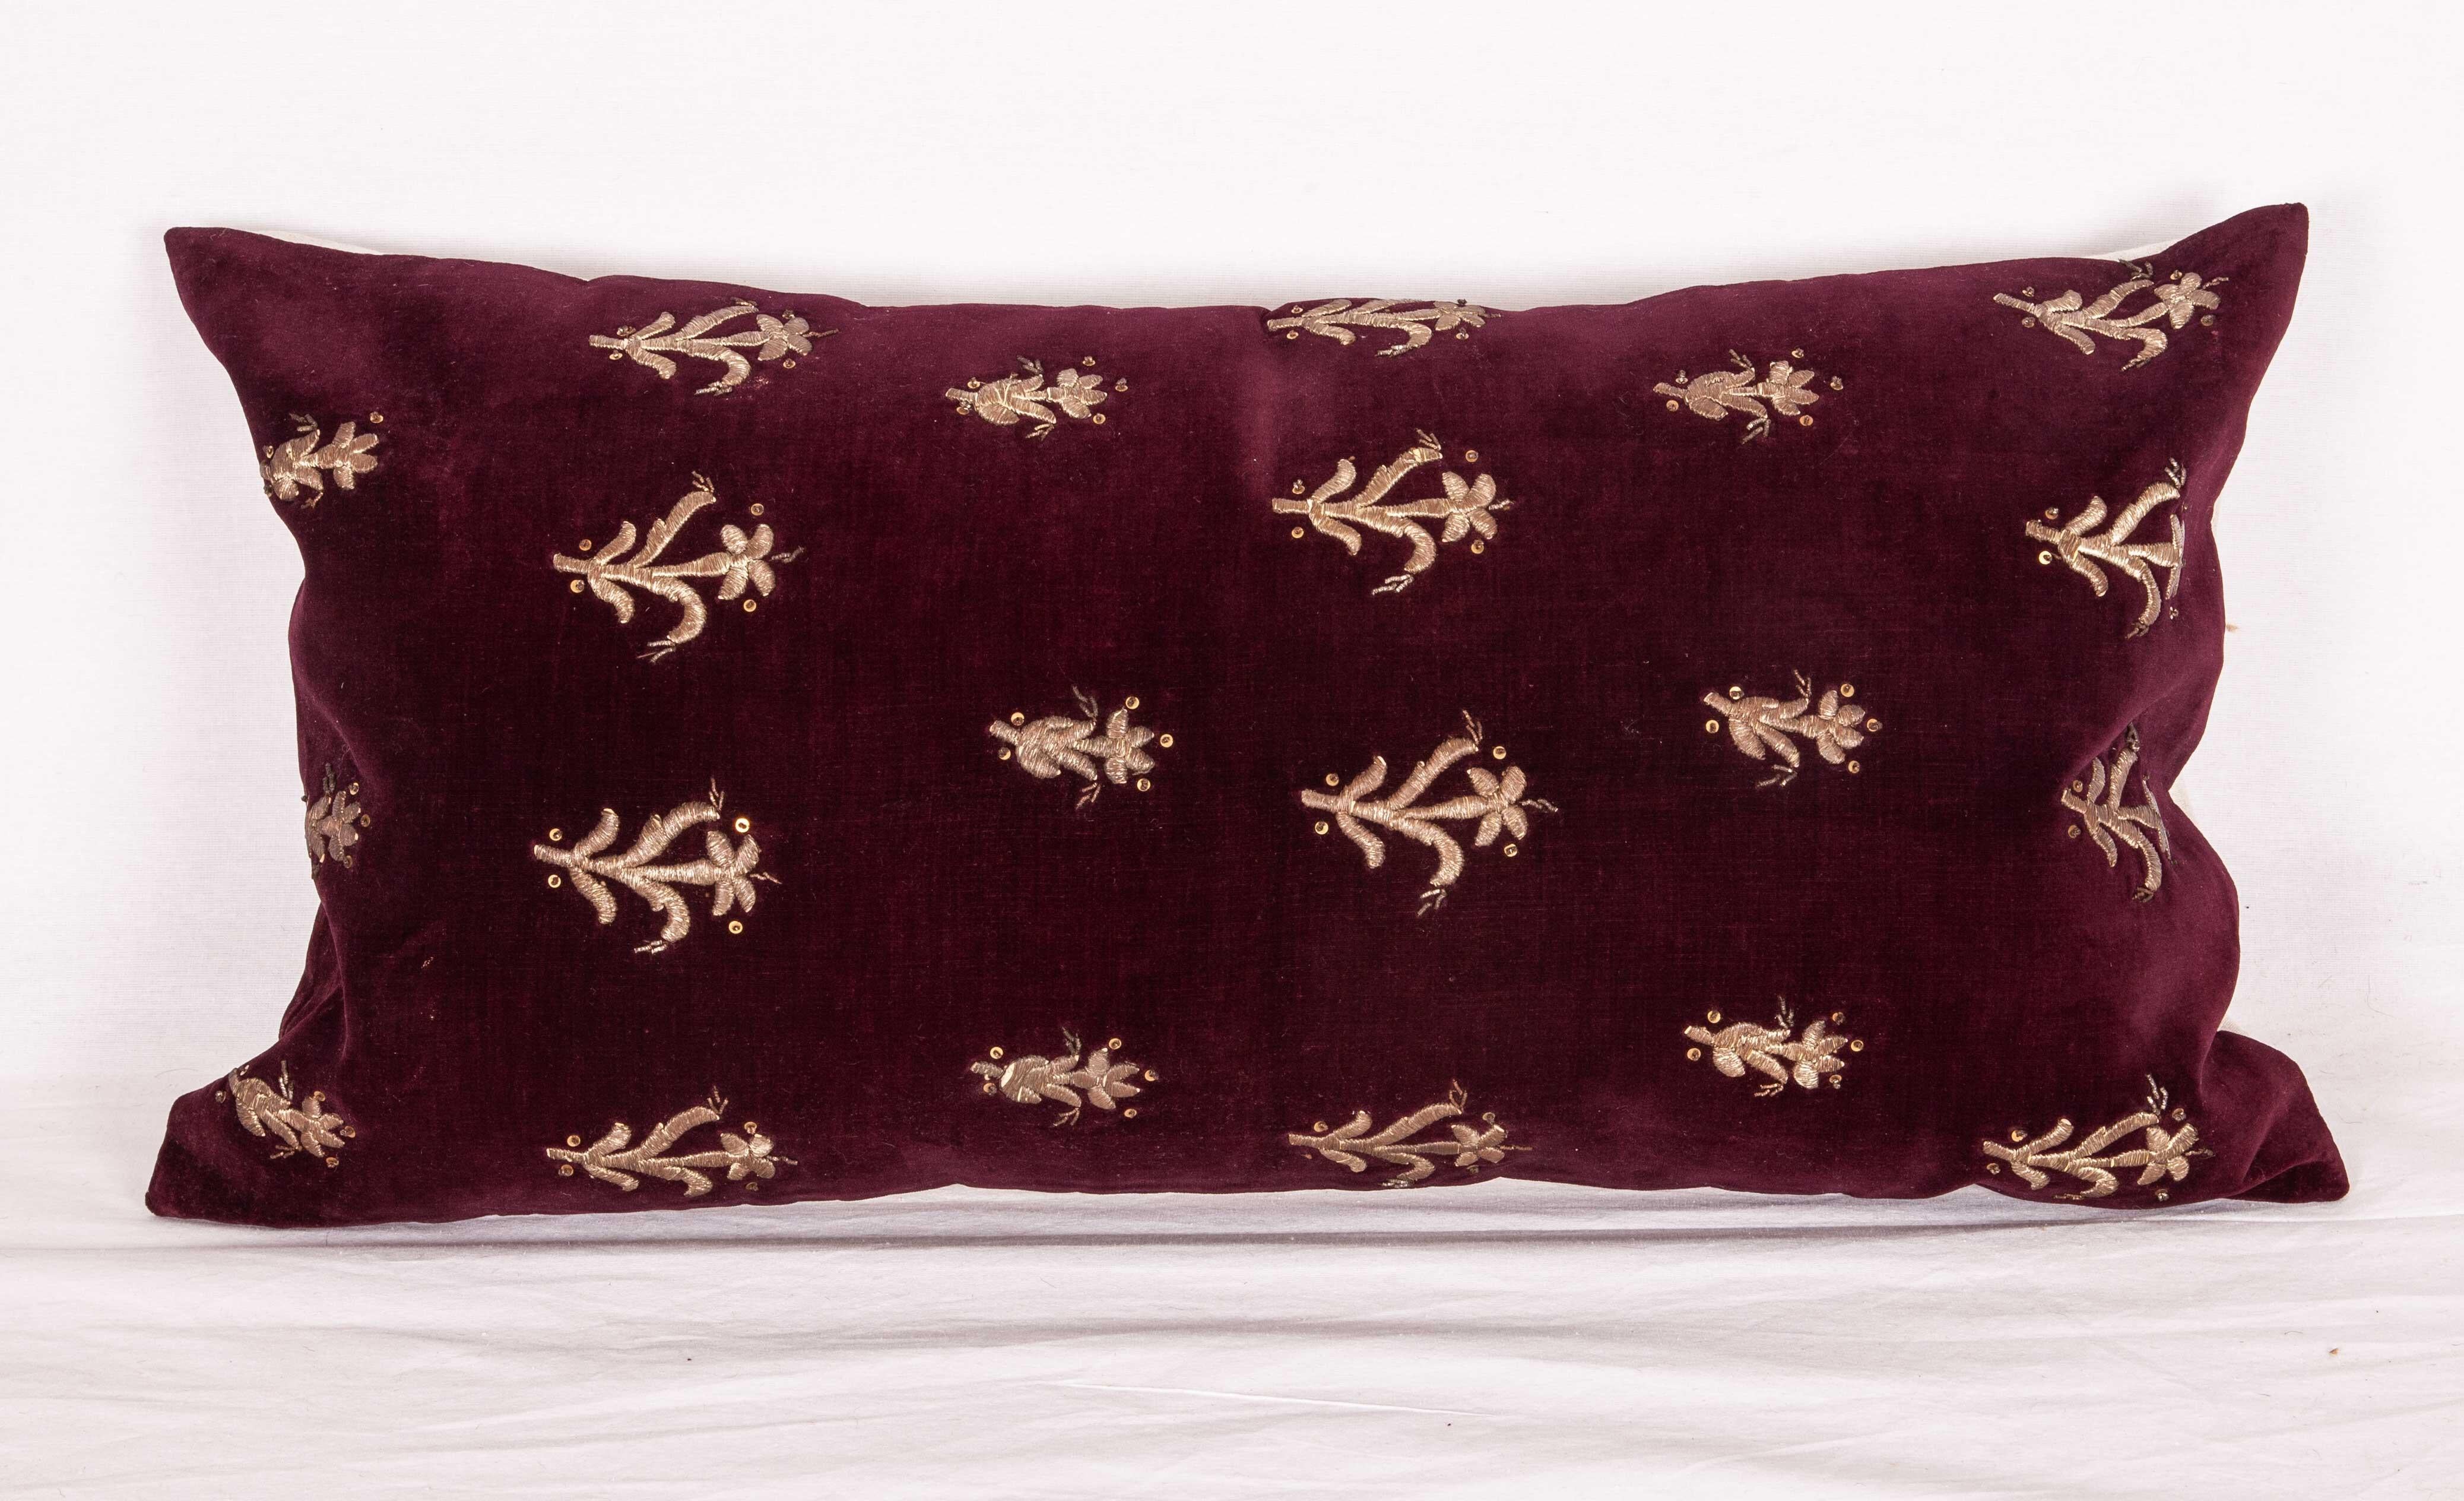 Ottoman Turkish Velvet Pillow Cases, Early 20th Century In Good Condition For Sale In Istanbul, TR